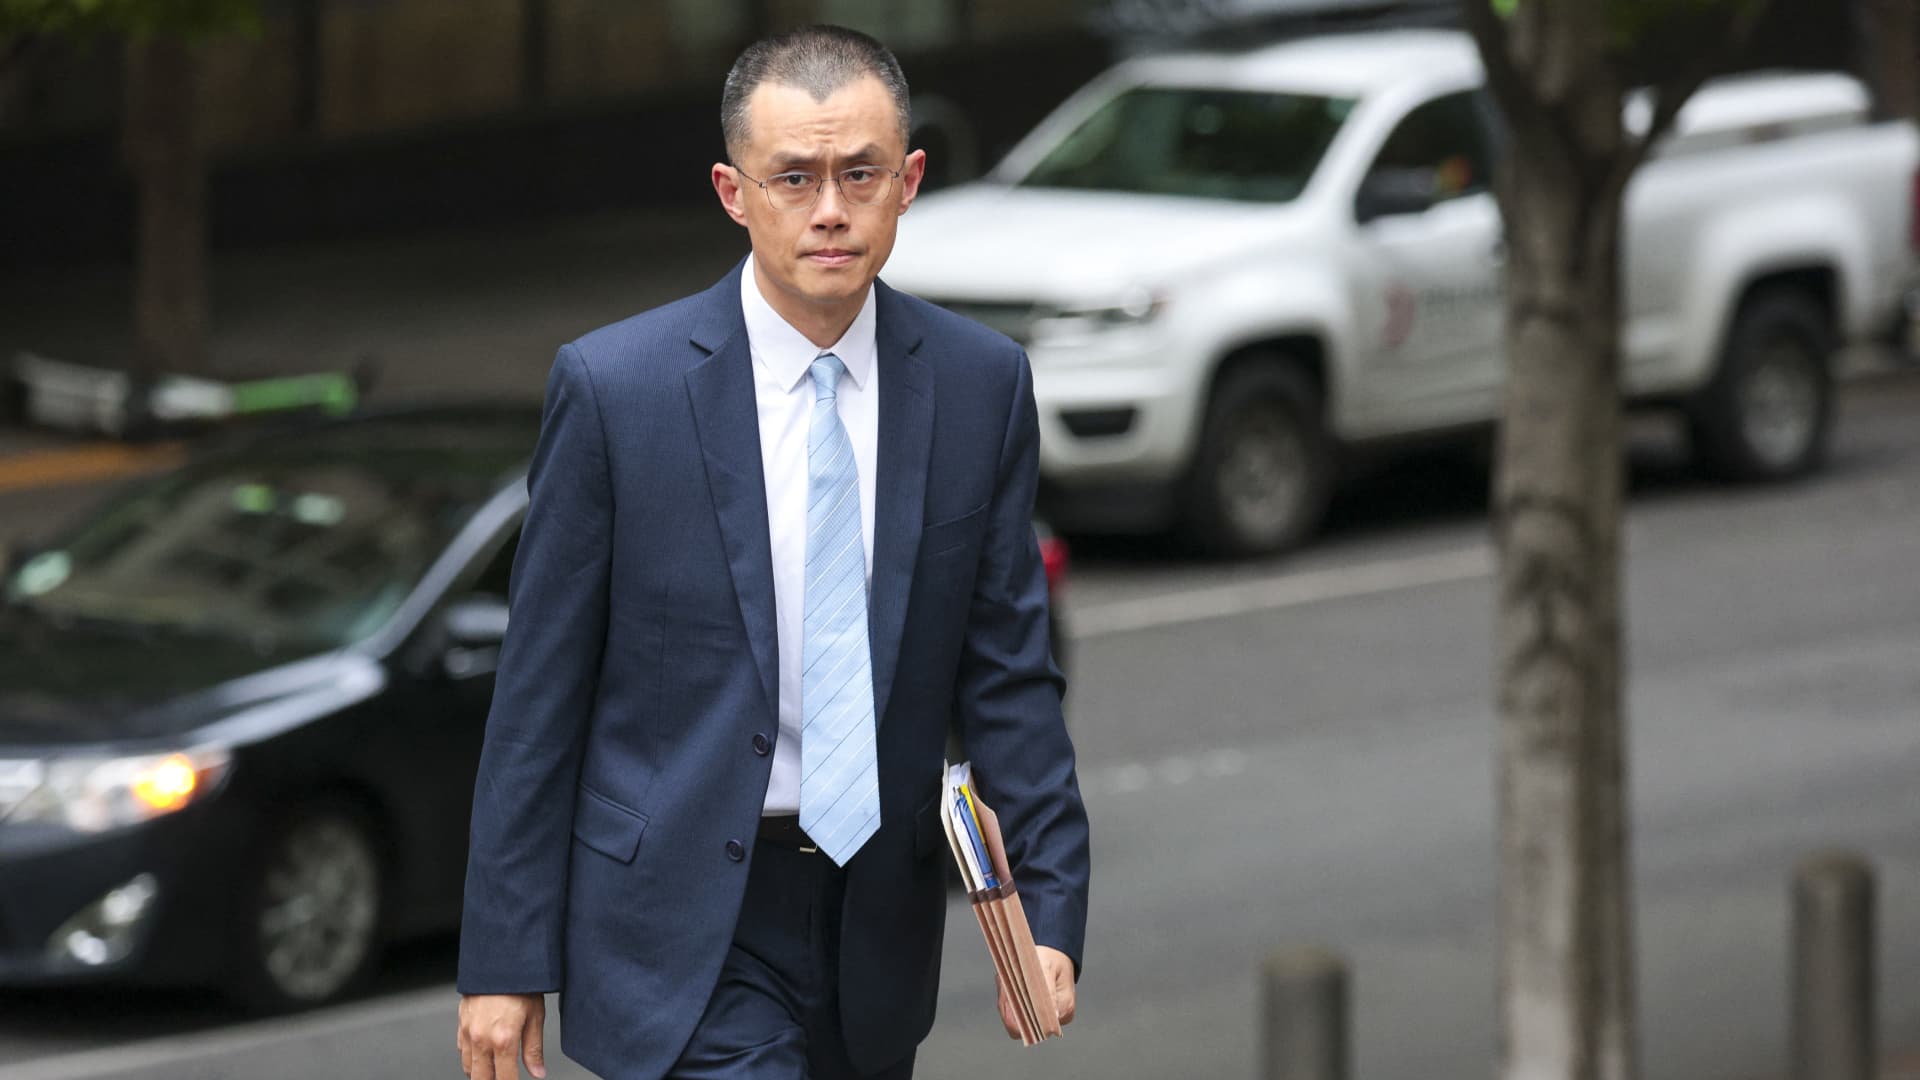 Binance founder Changpeng Zhao sentenced to four months in prison after plea deal